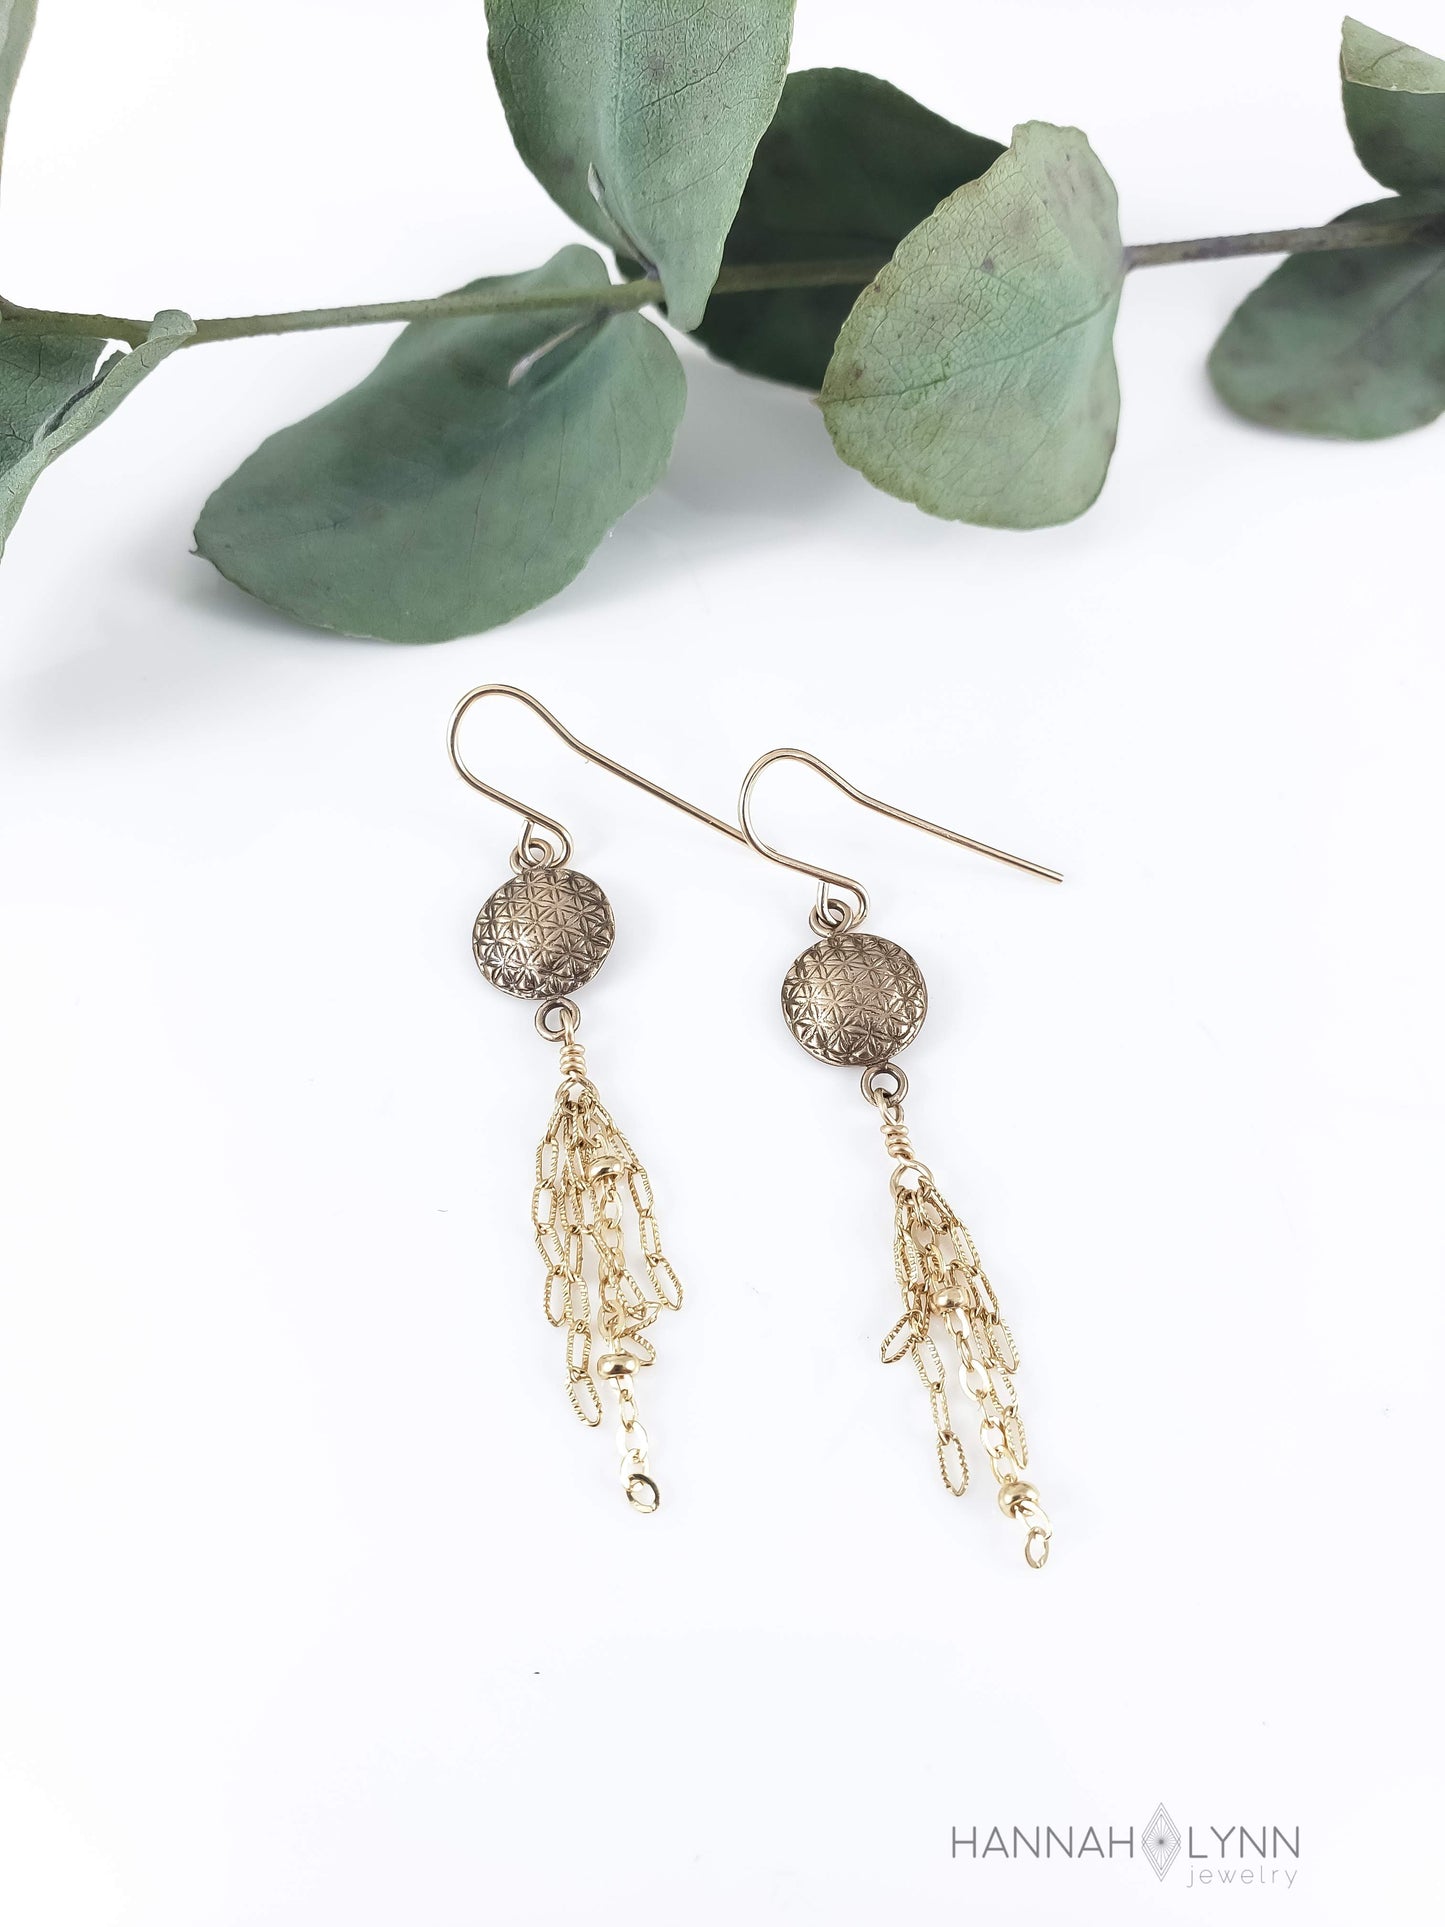 Flower of Life Tassel Earrings Available in Sterling Silver or Bronze & 14K Gold Filled